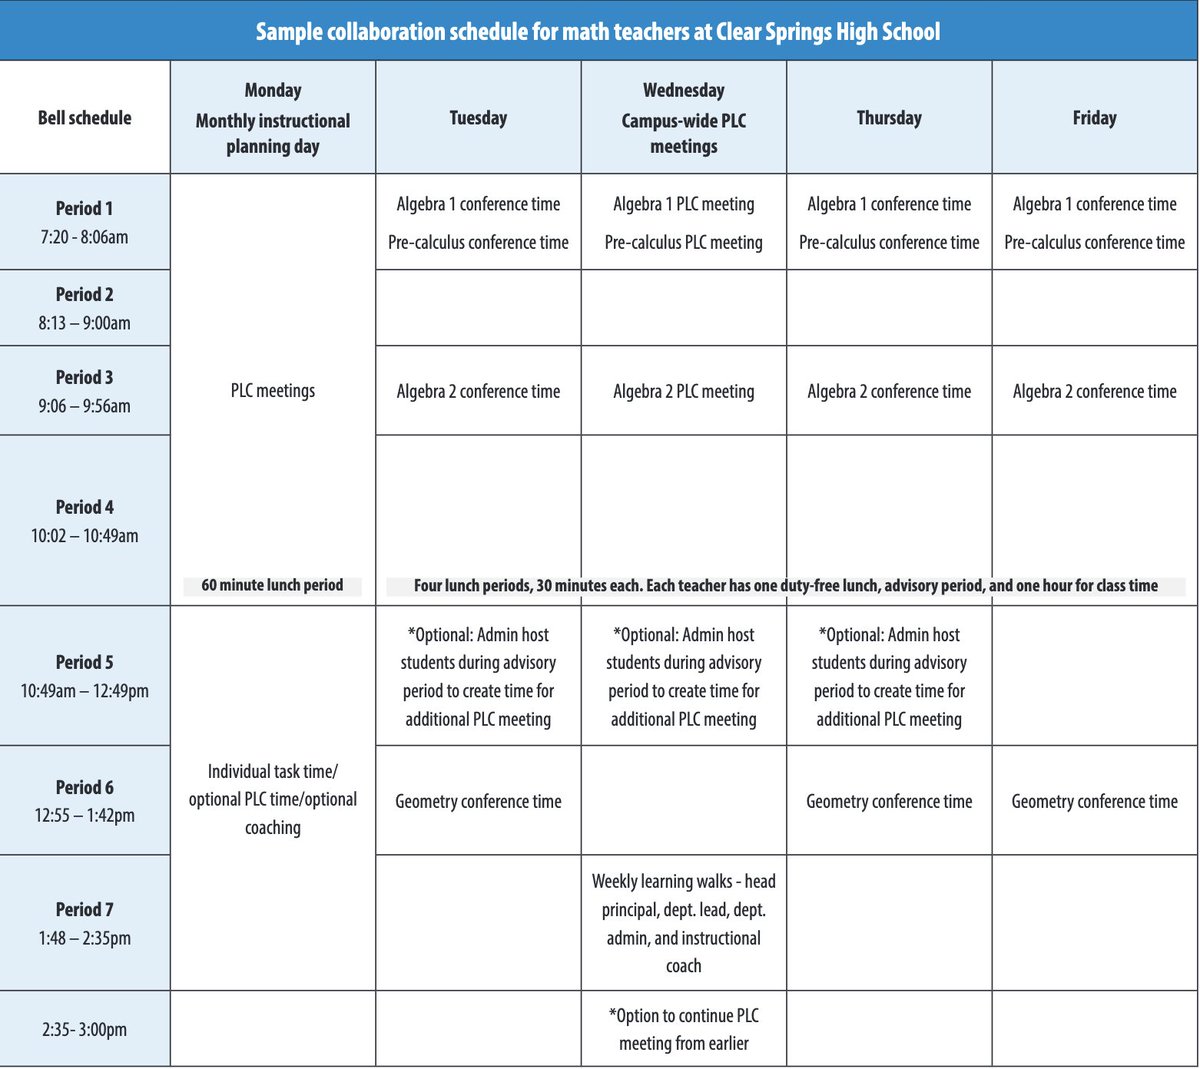 💫 Bookmark and save for some master schedule inspiration: Common lunch periods, advisory and structured PLC maximize collaboration to drive more equitable math outcomes. (Via @LearningForward & Clear Springs High School) #MTBoS #ITeachMath